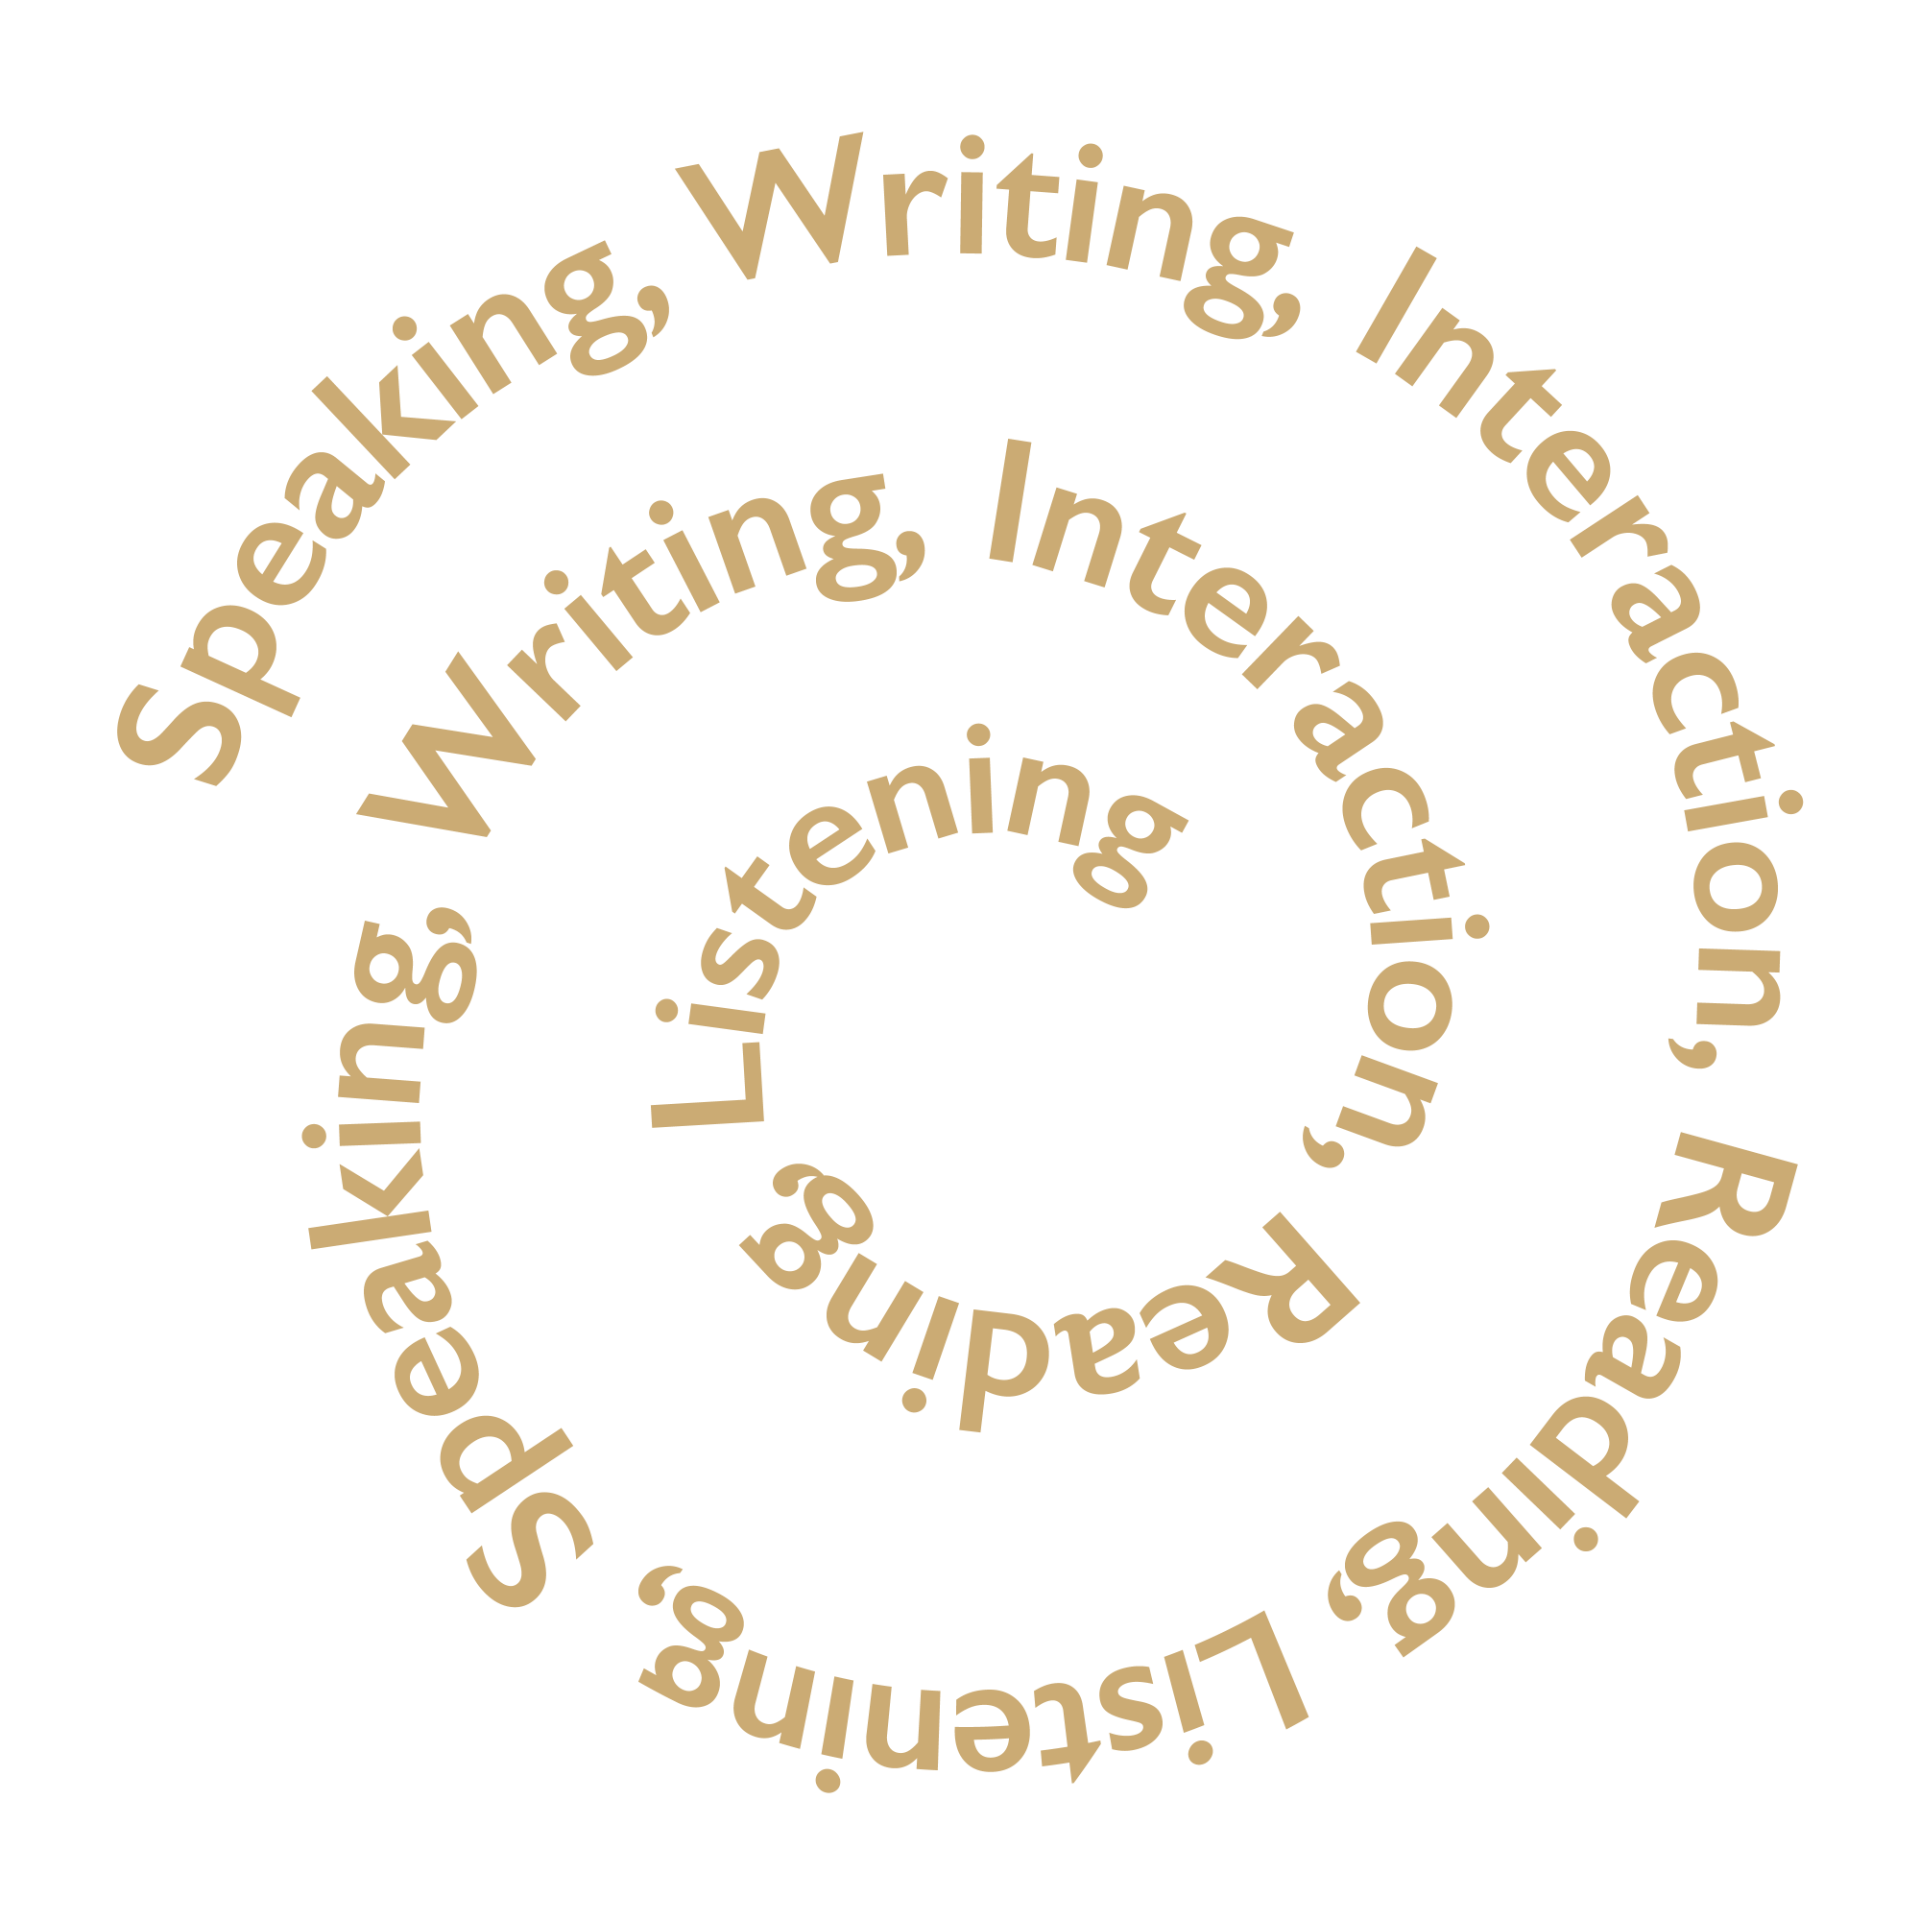 graphic of words swirling: speaking, writing, interaction, reading, learning